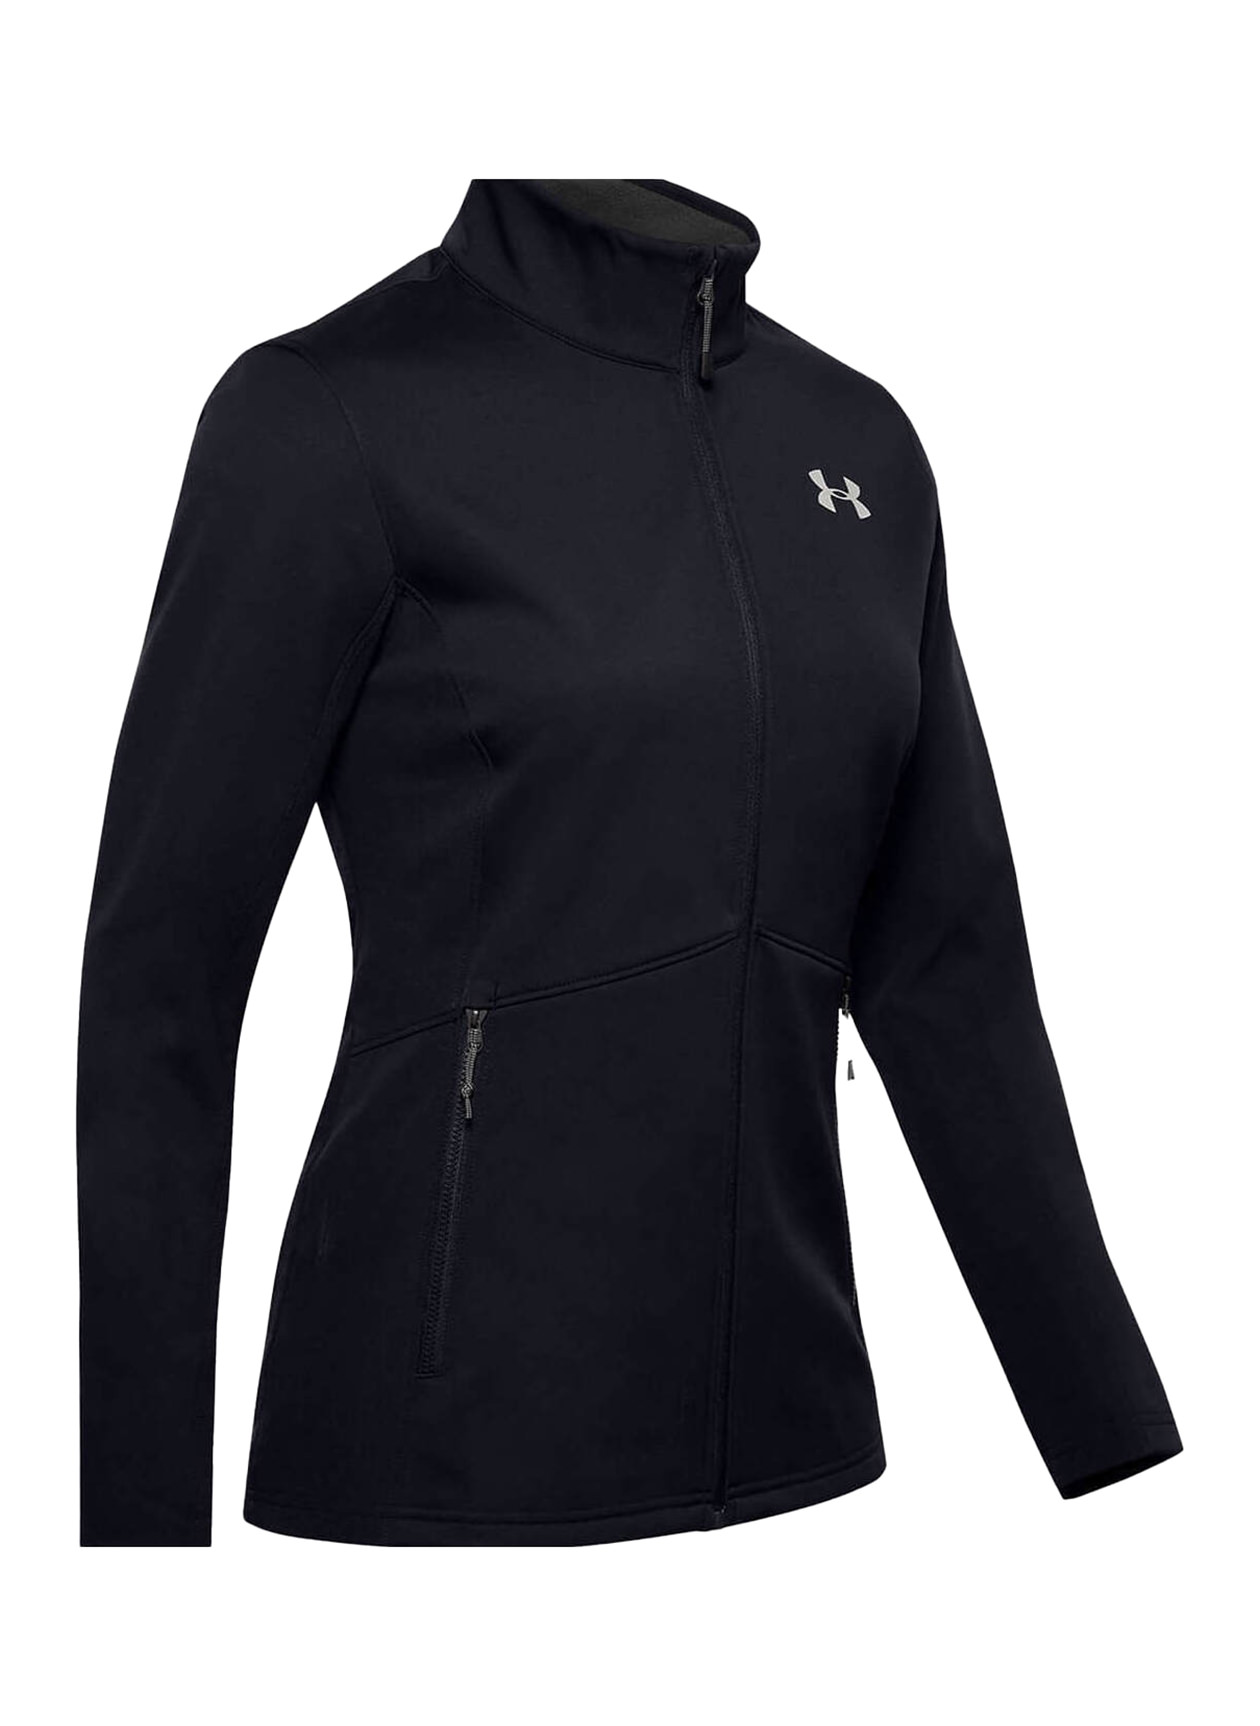 Custom Jackets  Corporate Under Armour Women's Black All Day